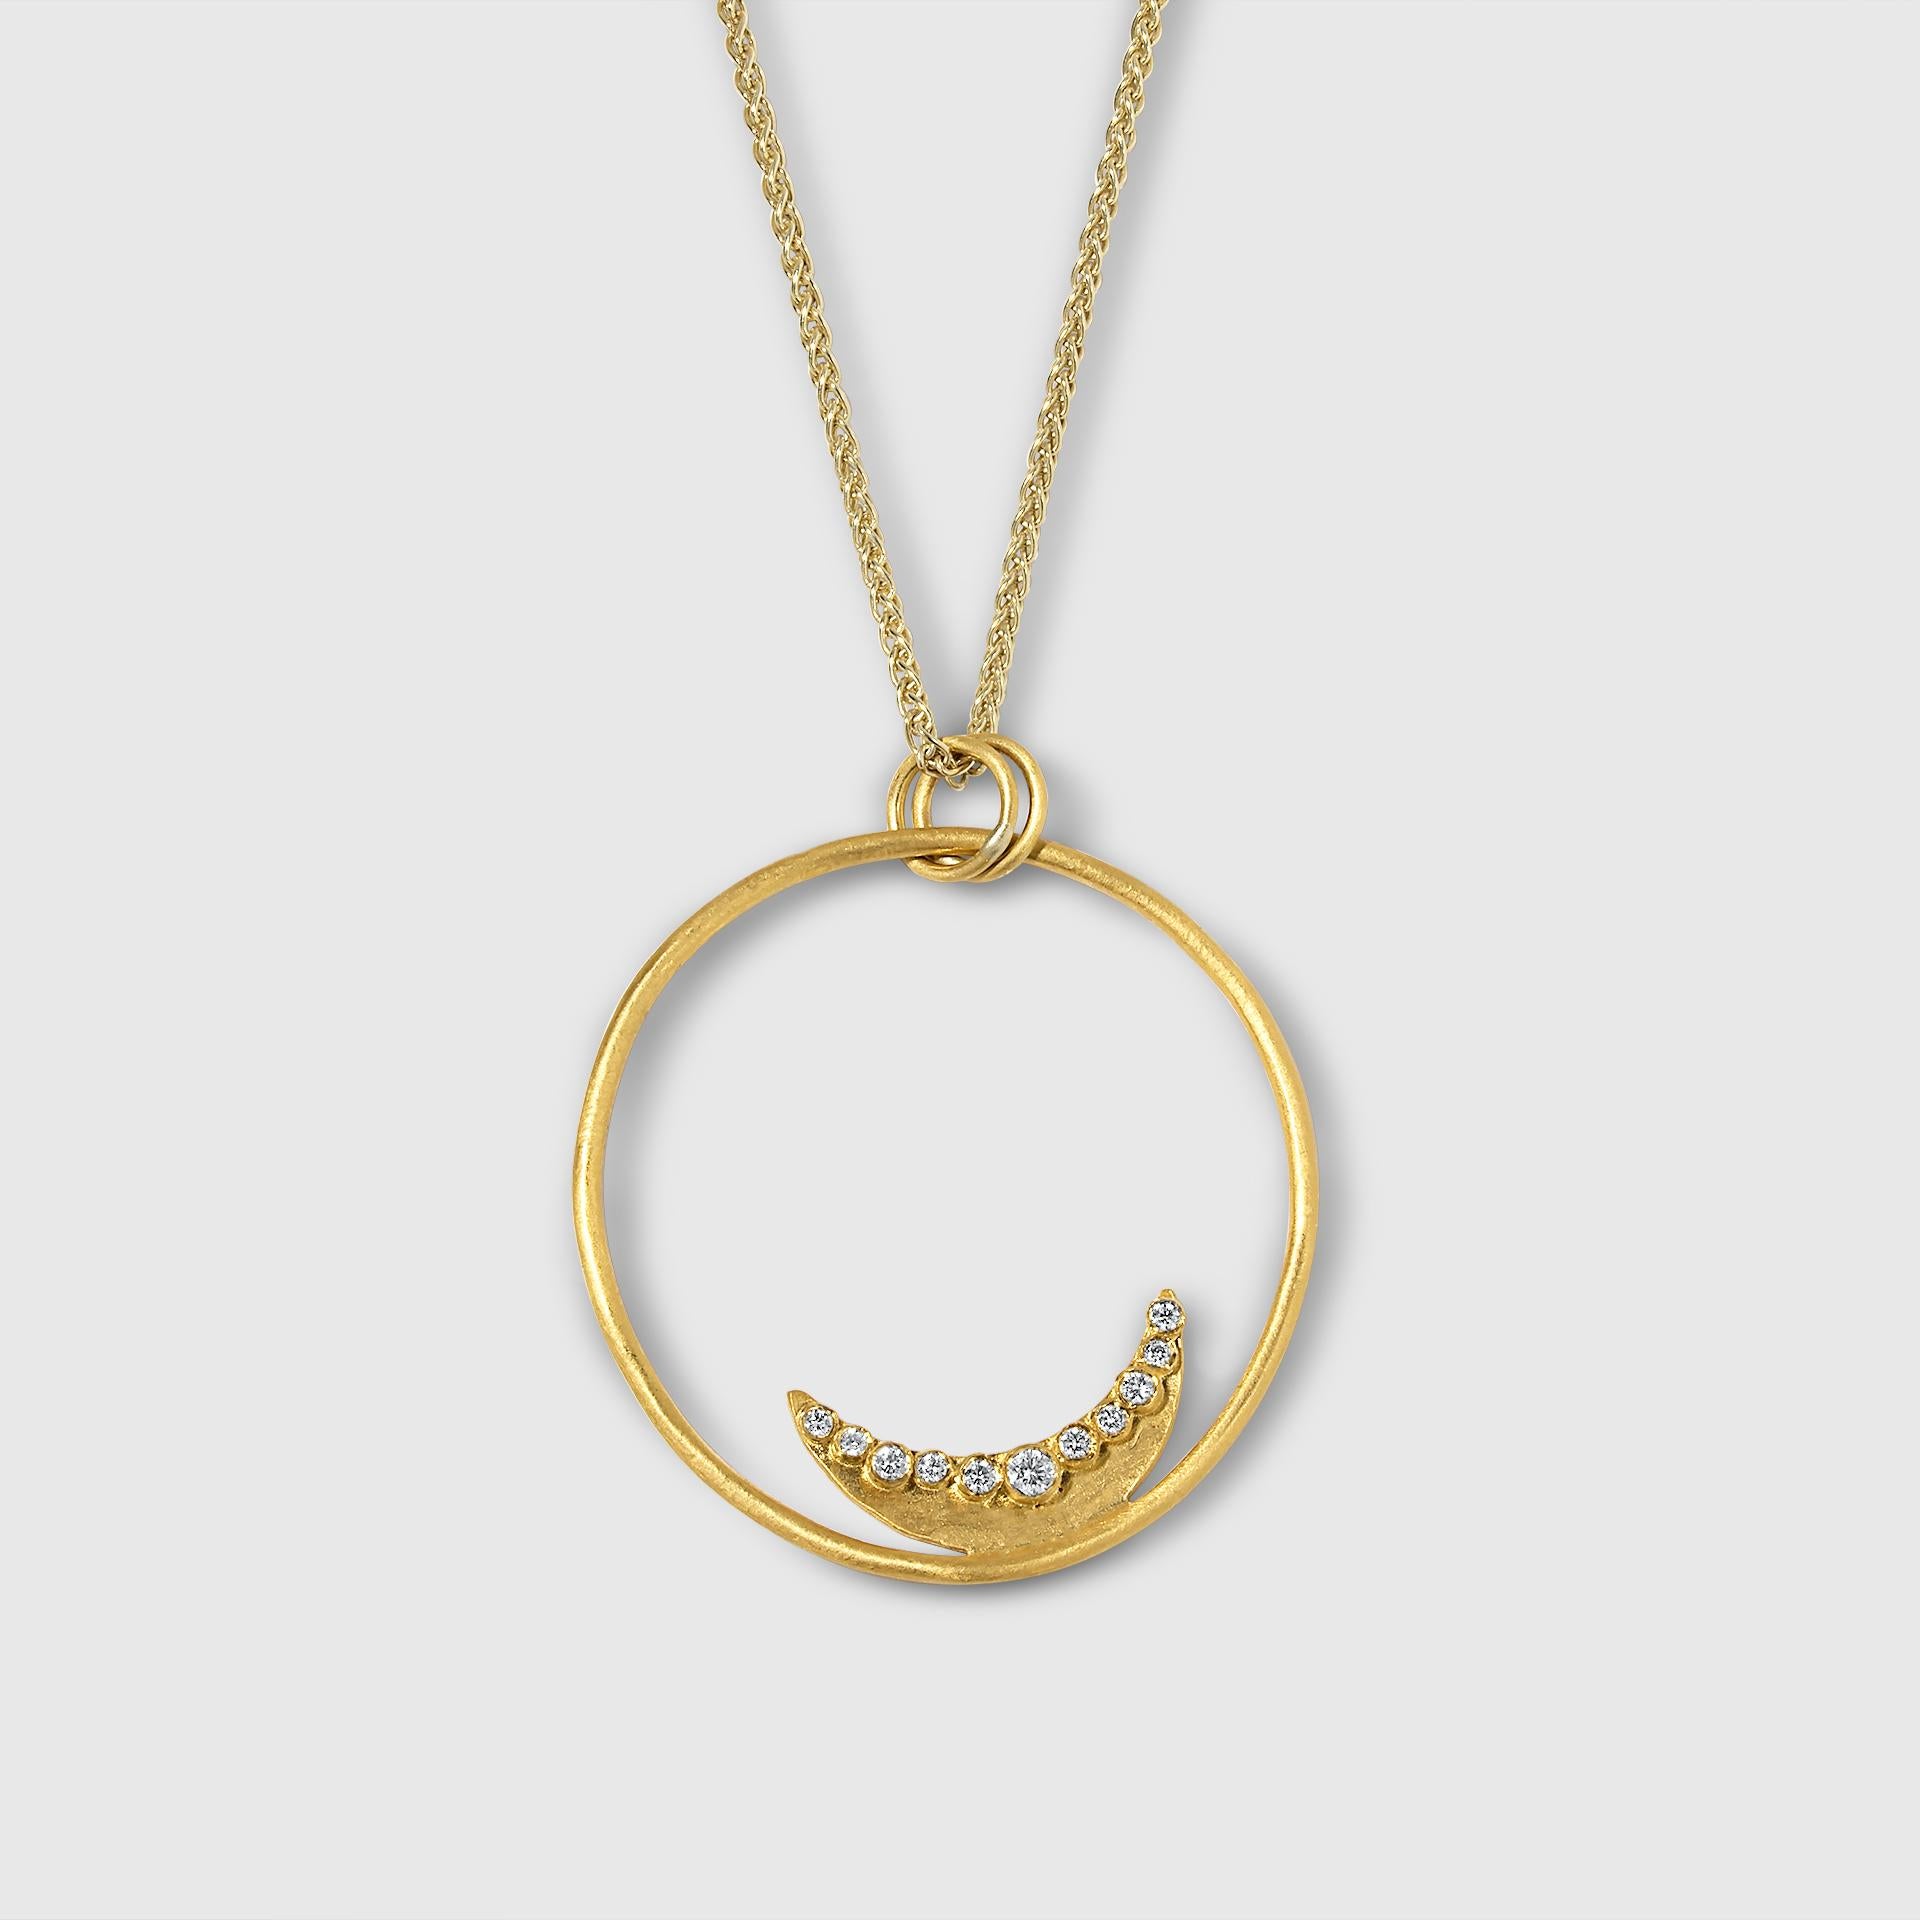 Half Moon Solid 24kt Gold Pendant Necklace with Diamonds by Prehistoric Works of Istanbul, Turkey. These pendants look great alone or paired with other coin pendants or with miniature pendants. Measures 35mm x 35mm. Goes very well with a 22